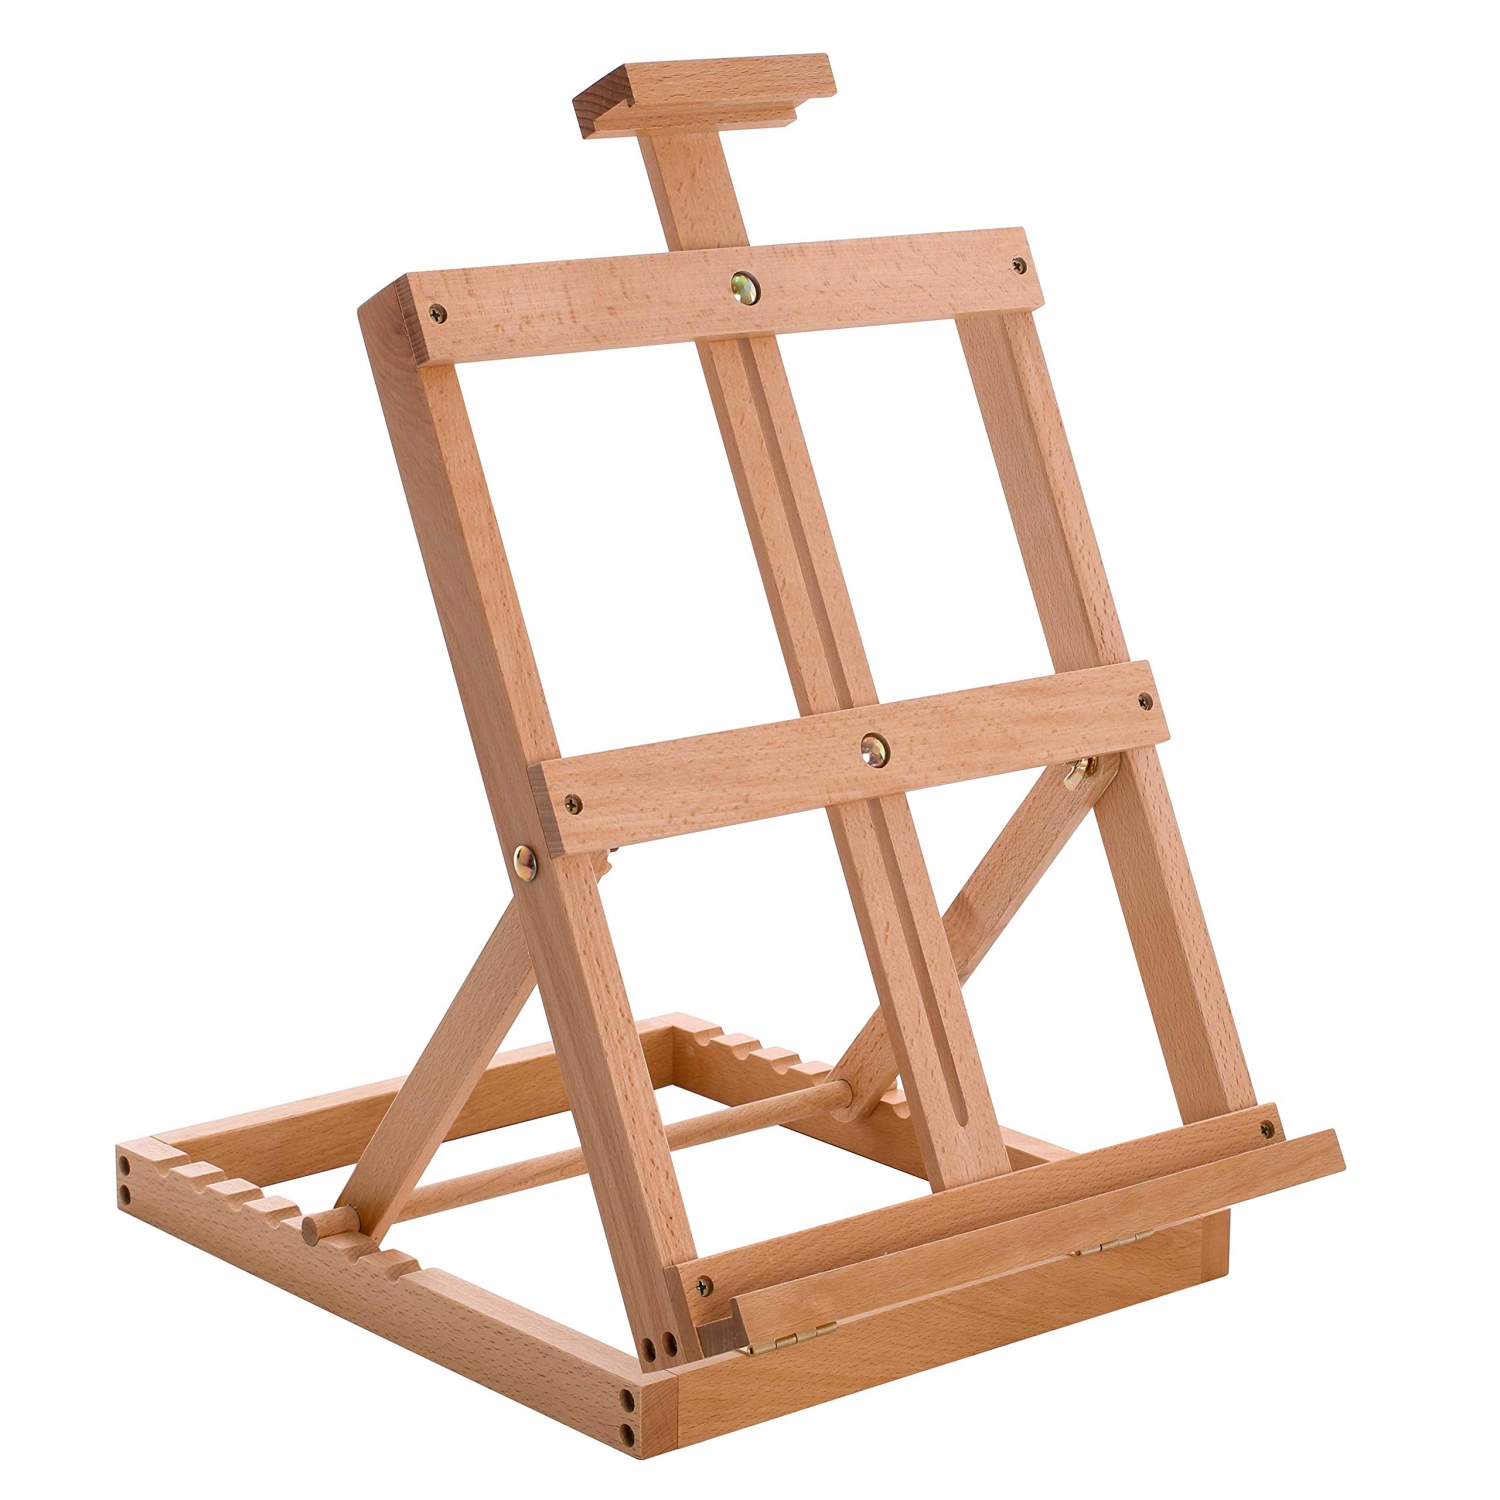 Venice Studio Easel - Heavy Duty Tabletop Wooden H-Frame for Artists, Adjustable Beechwood Painting and Display Holder Stand - Holds Up to 23" Canvas - Portable and Sturdy Table De